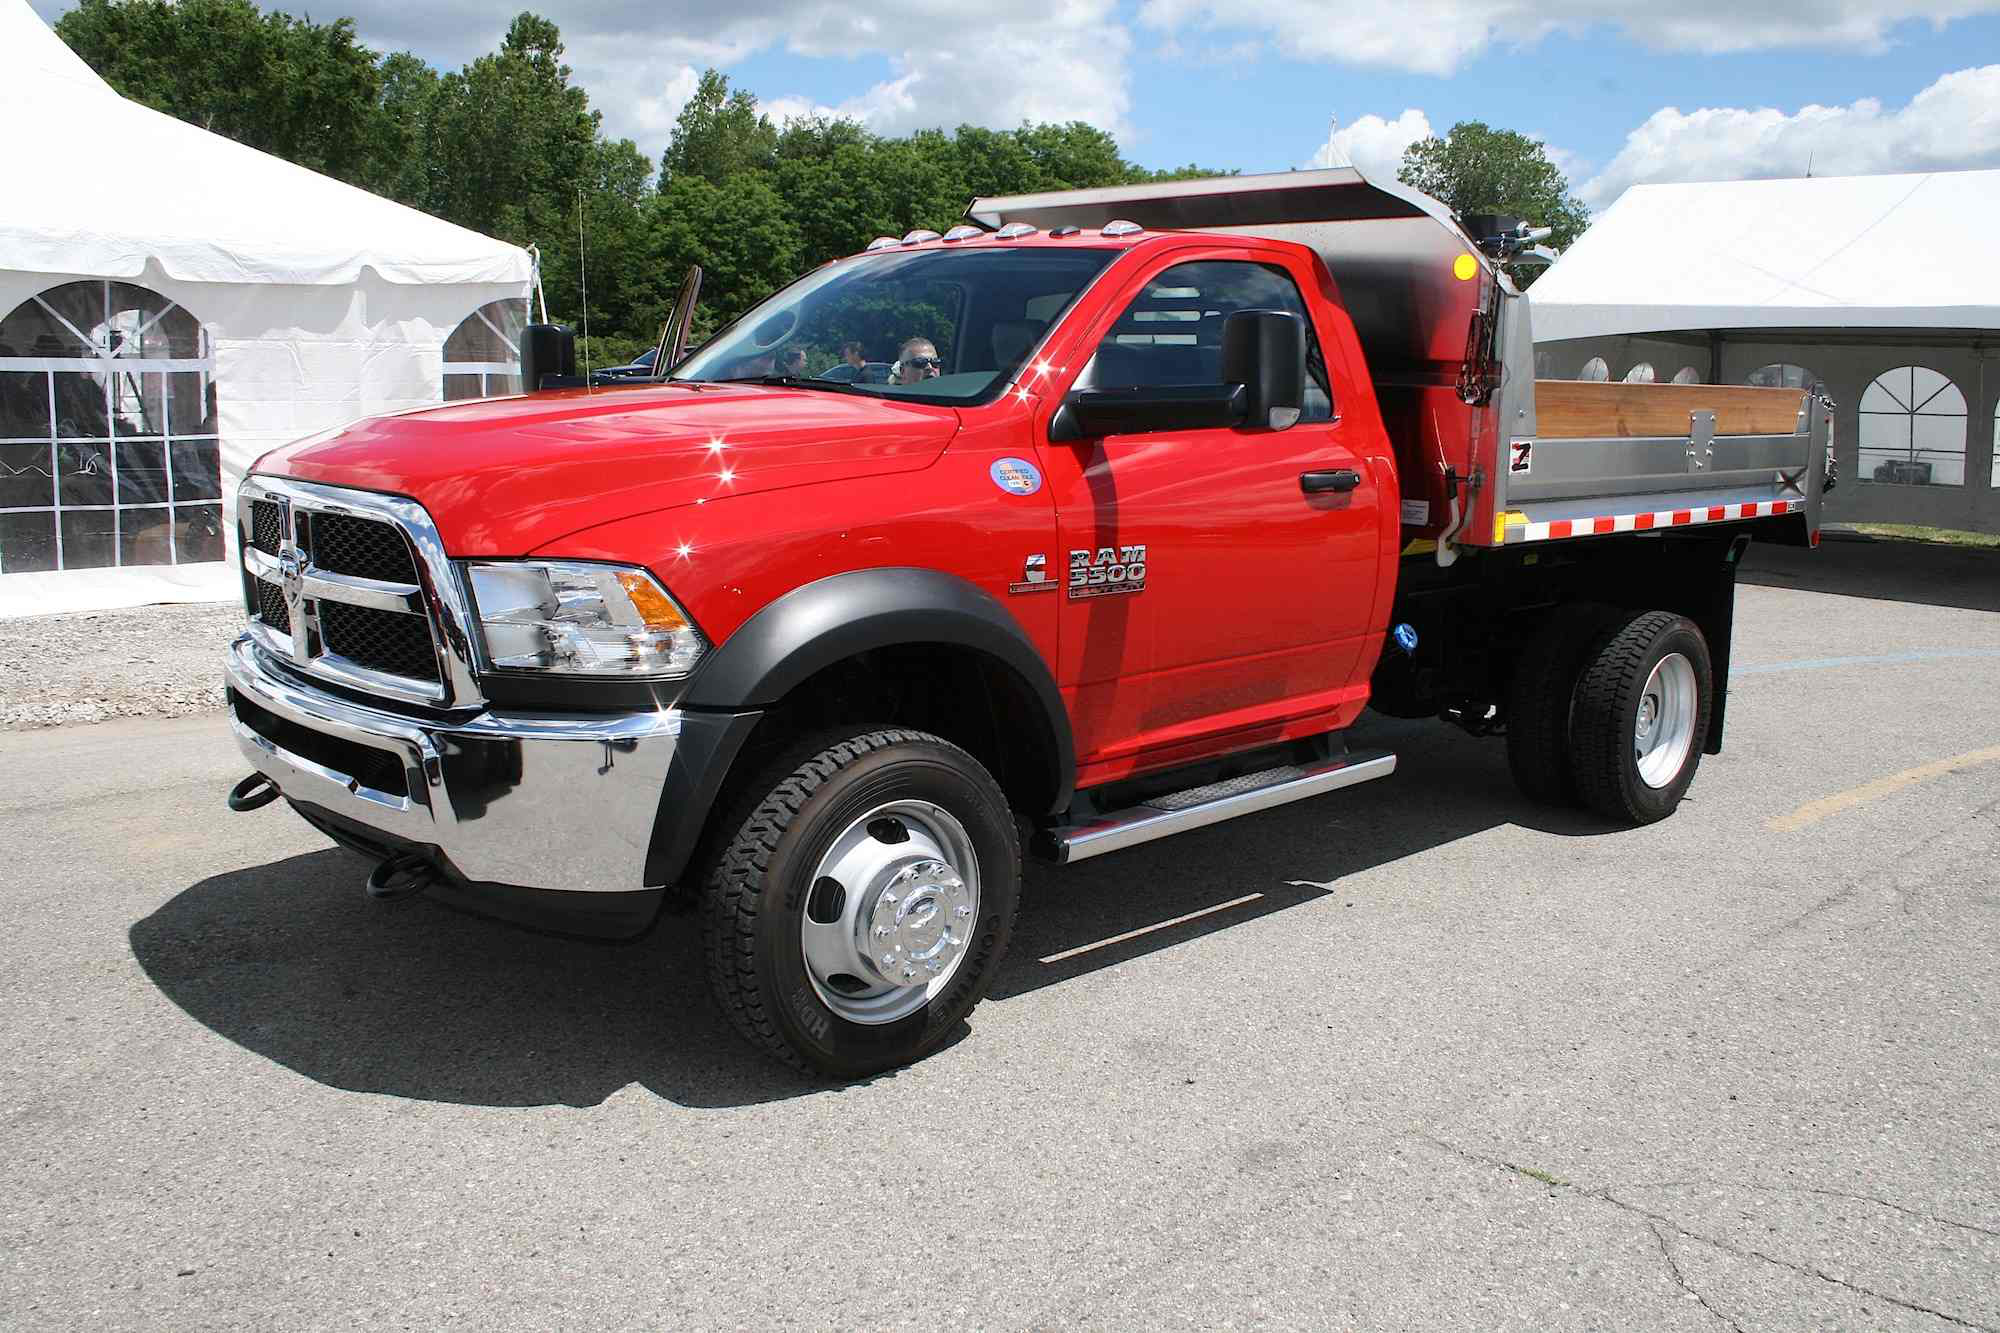 Ram 5500 chassis cab gets a few improvements for 2018 (VIDEO) How To Make A Ram 5500 Ride Better